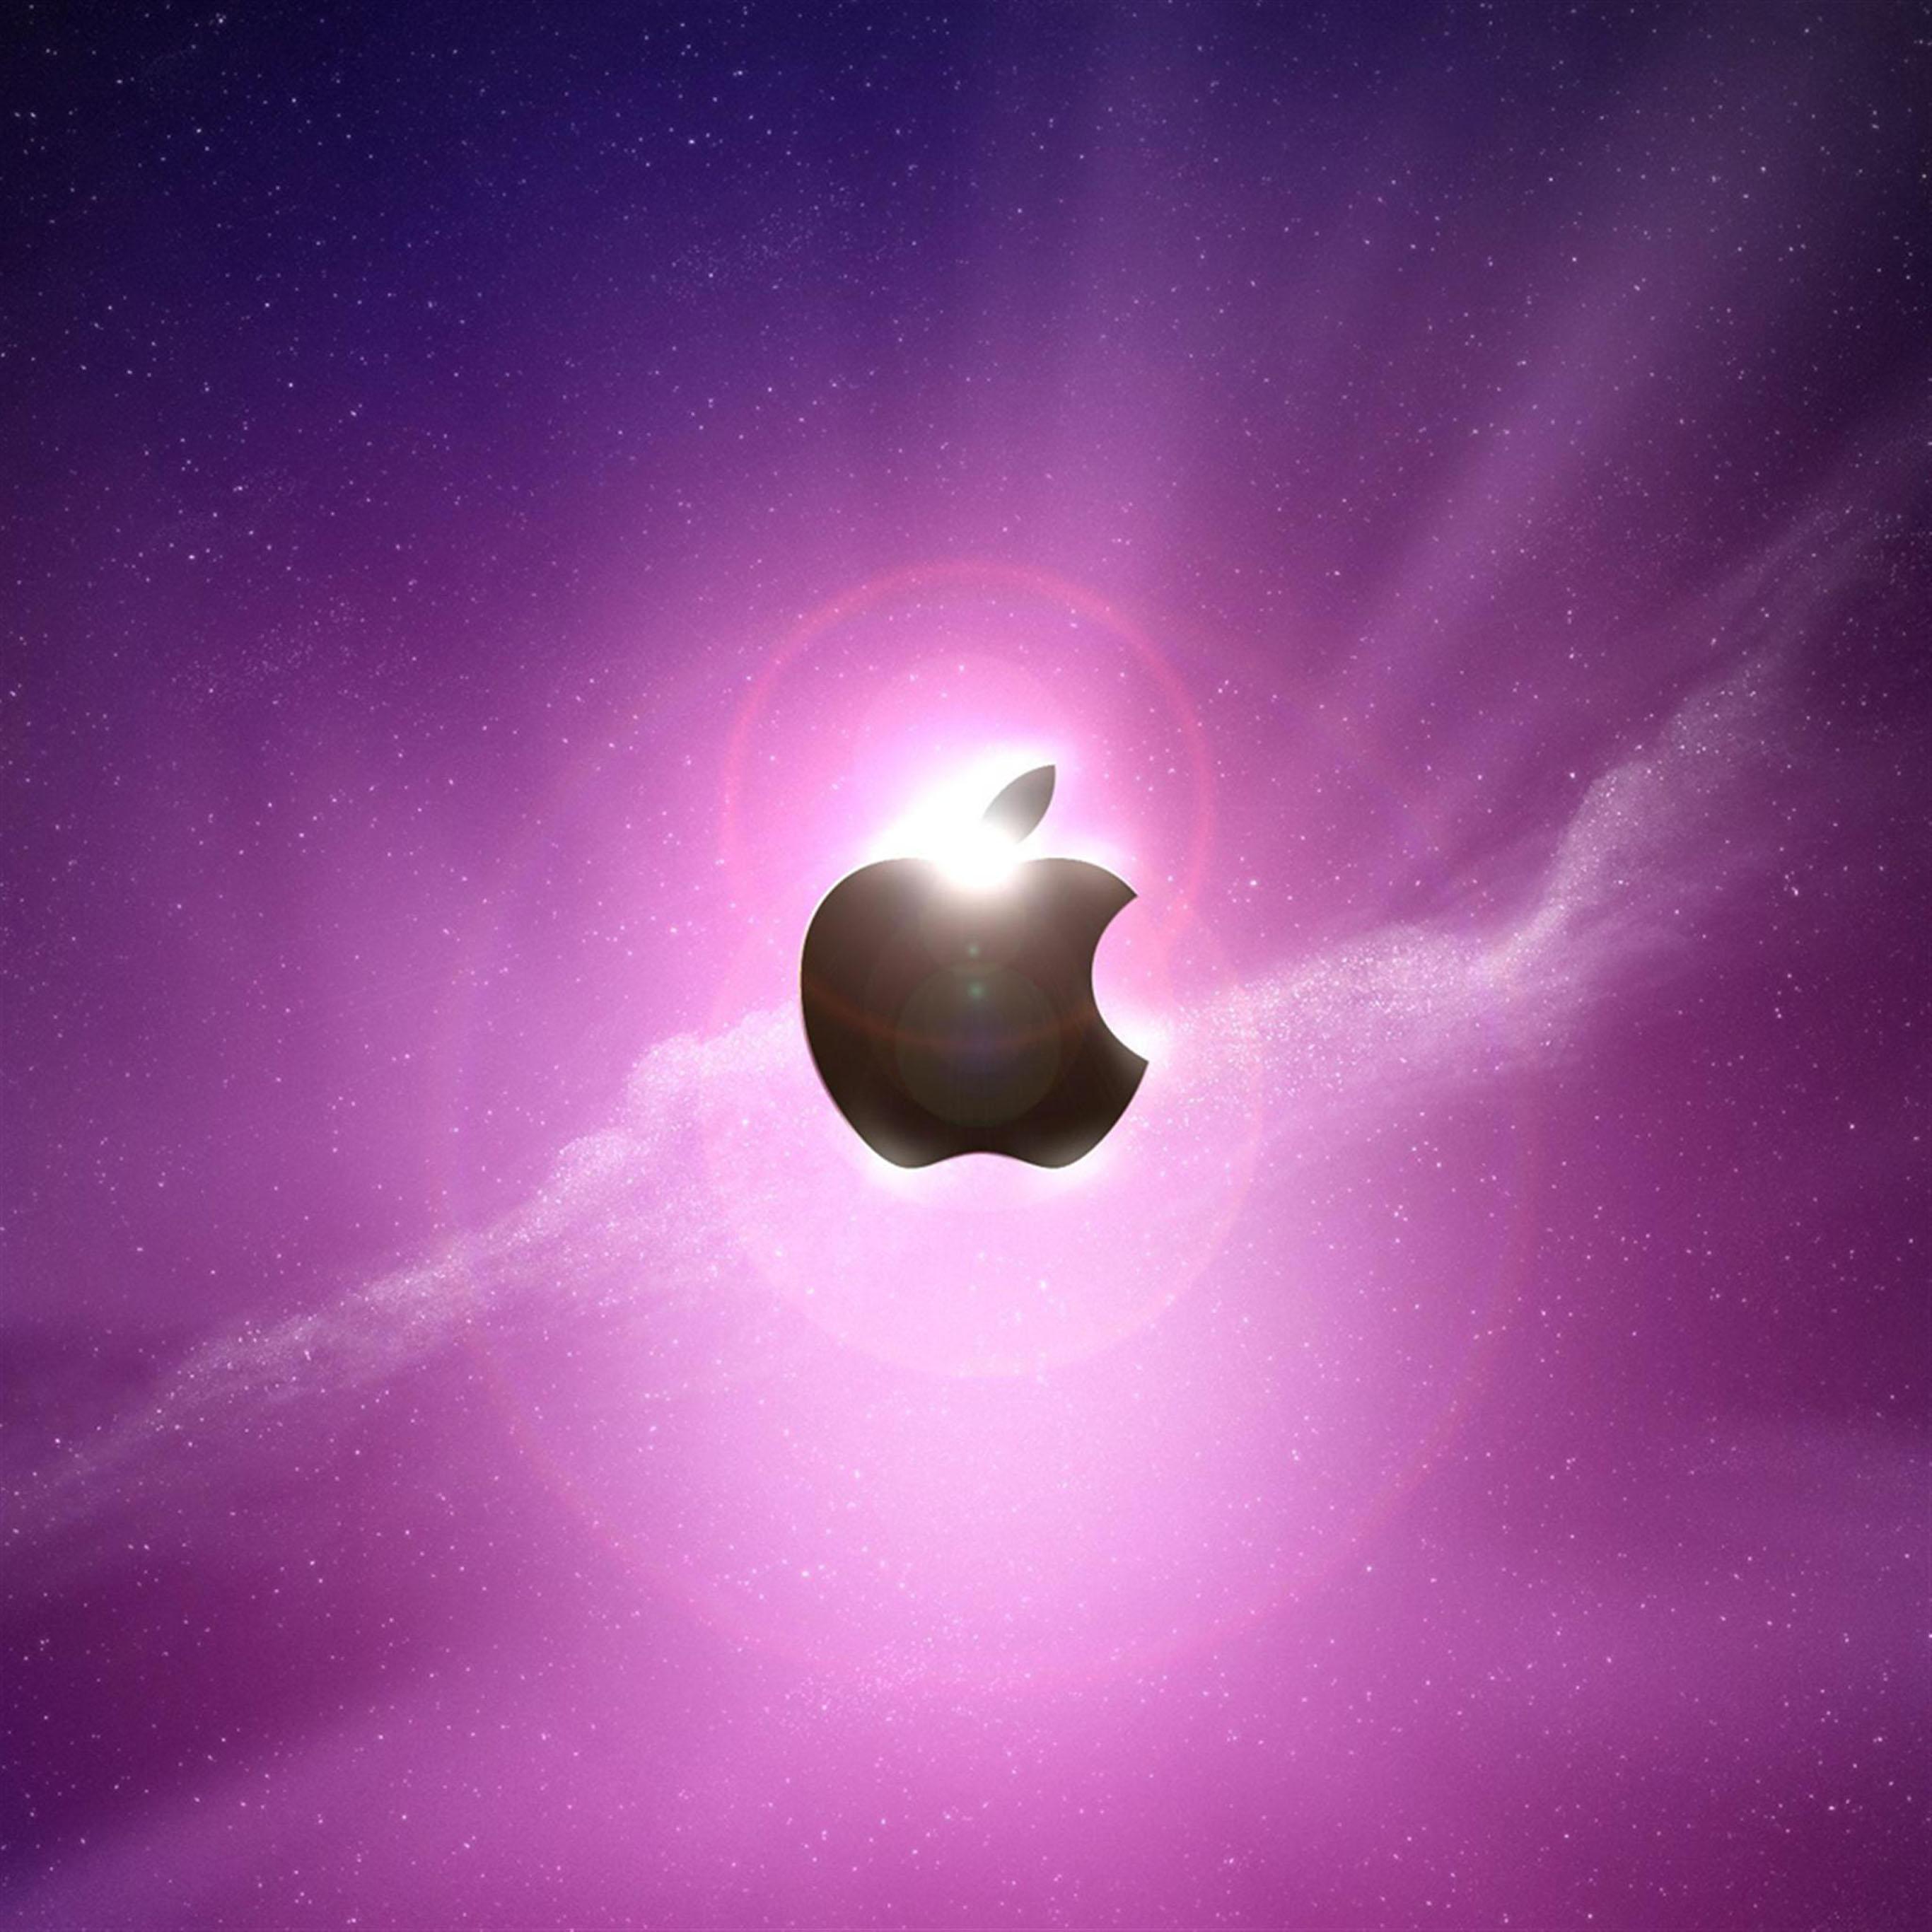 Apple iPad Backgrounds Free Download